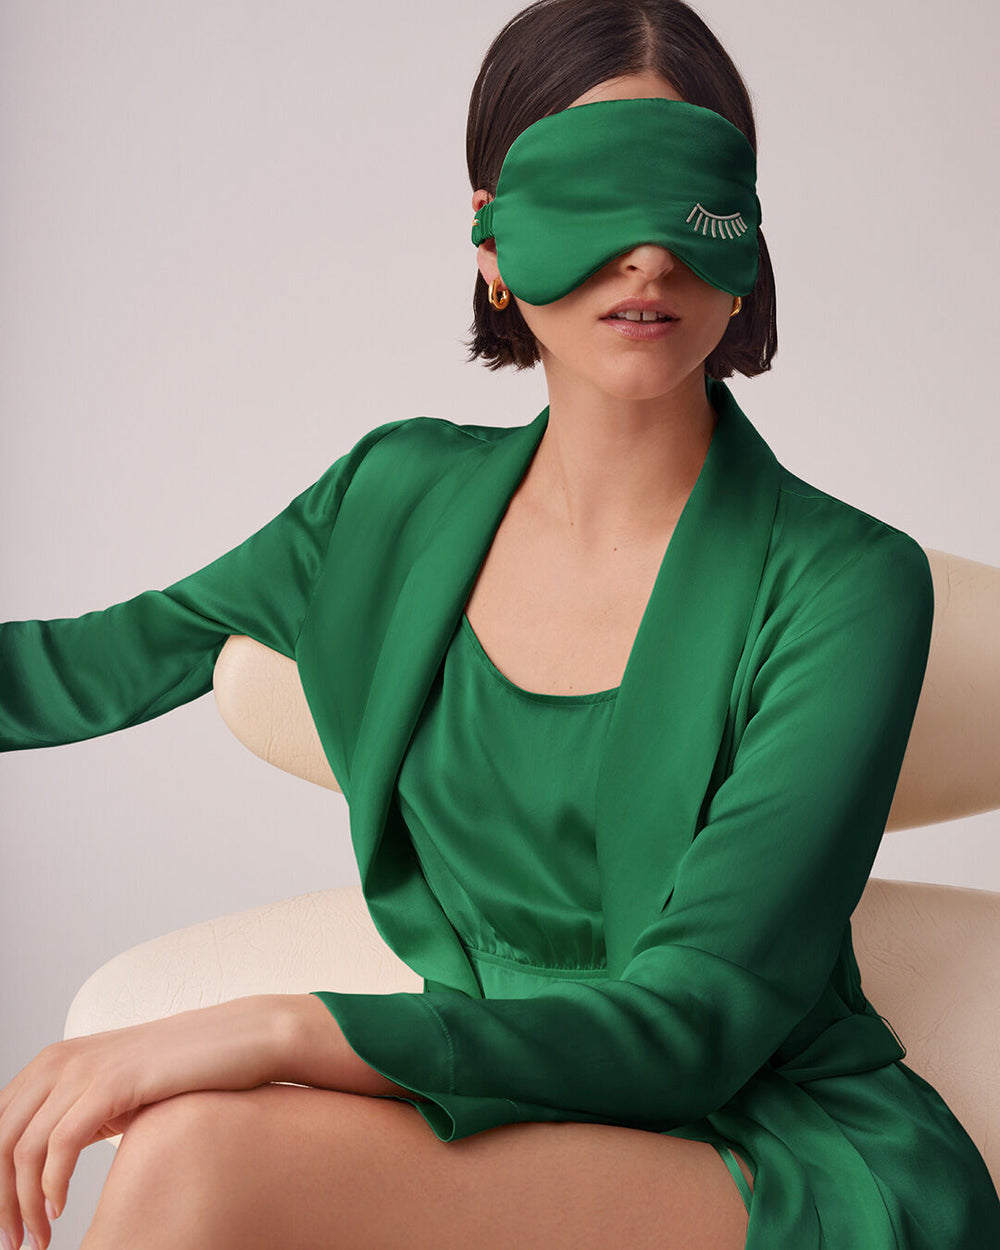 Woman seated on a chair wearing a blindfold and outfit.